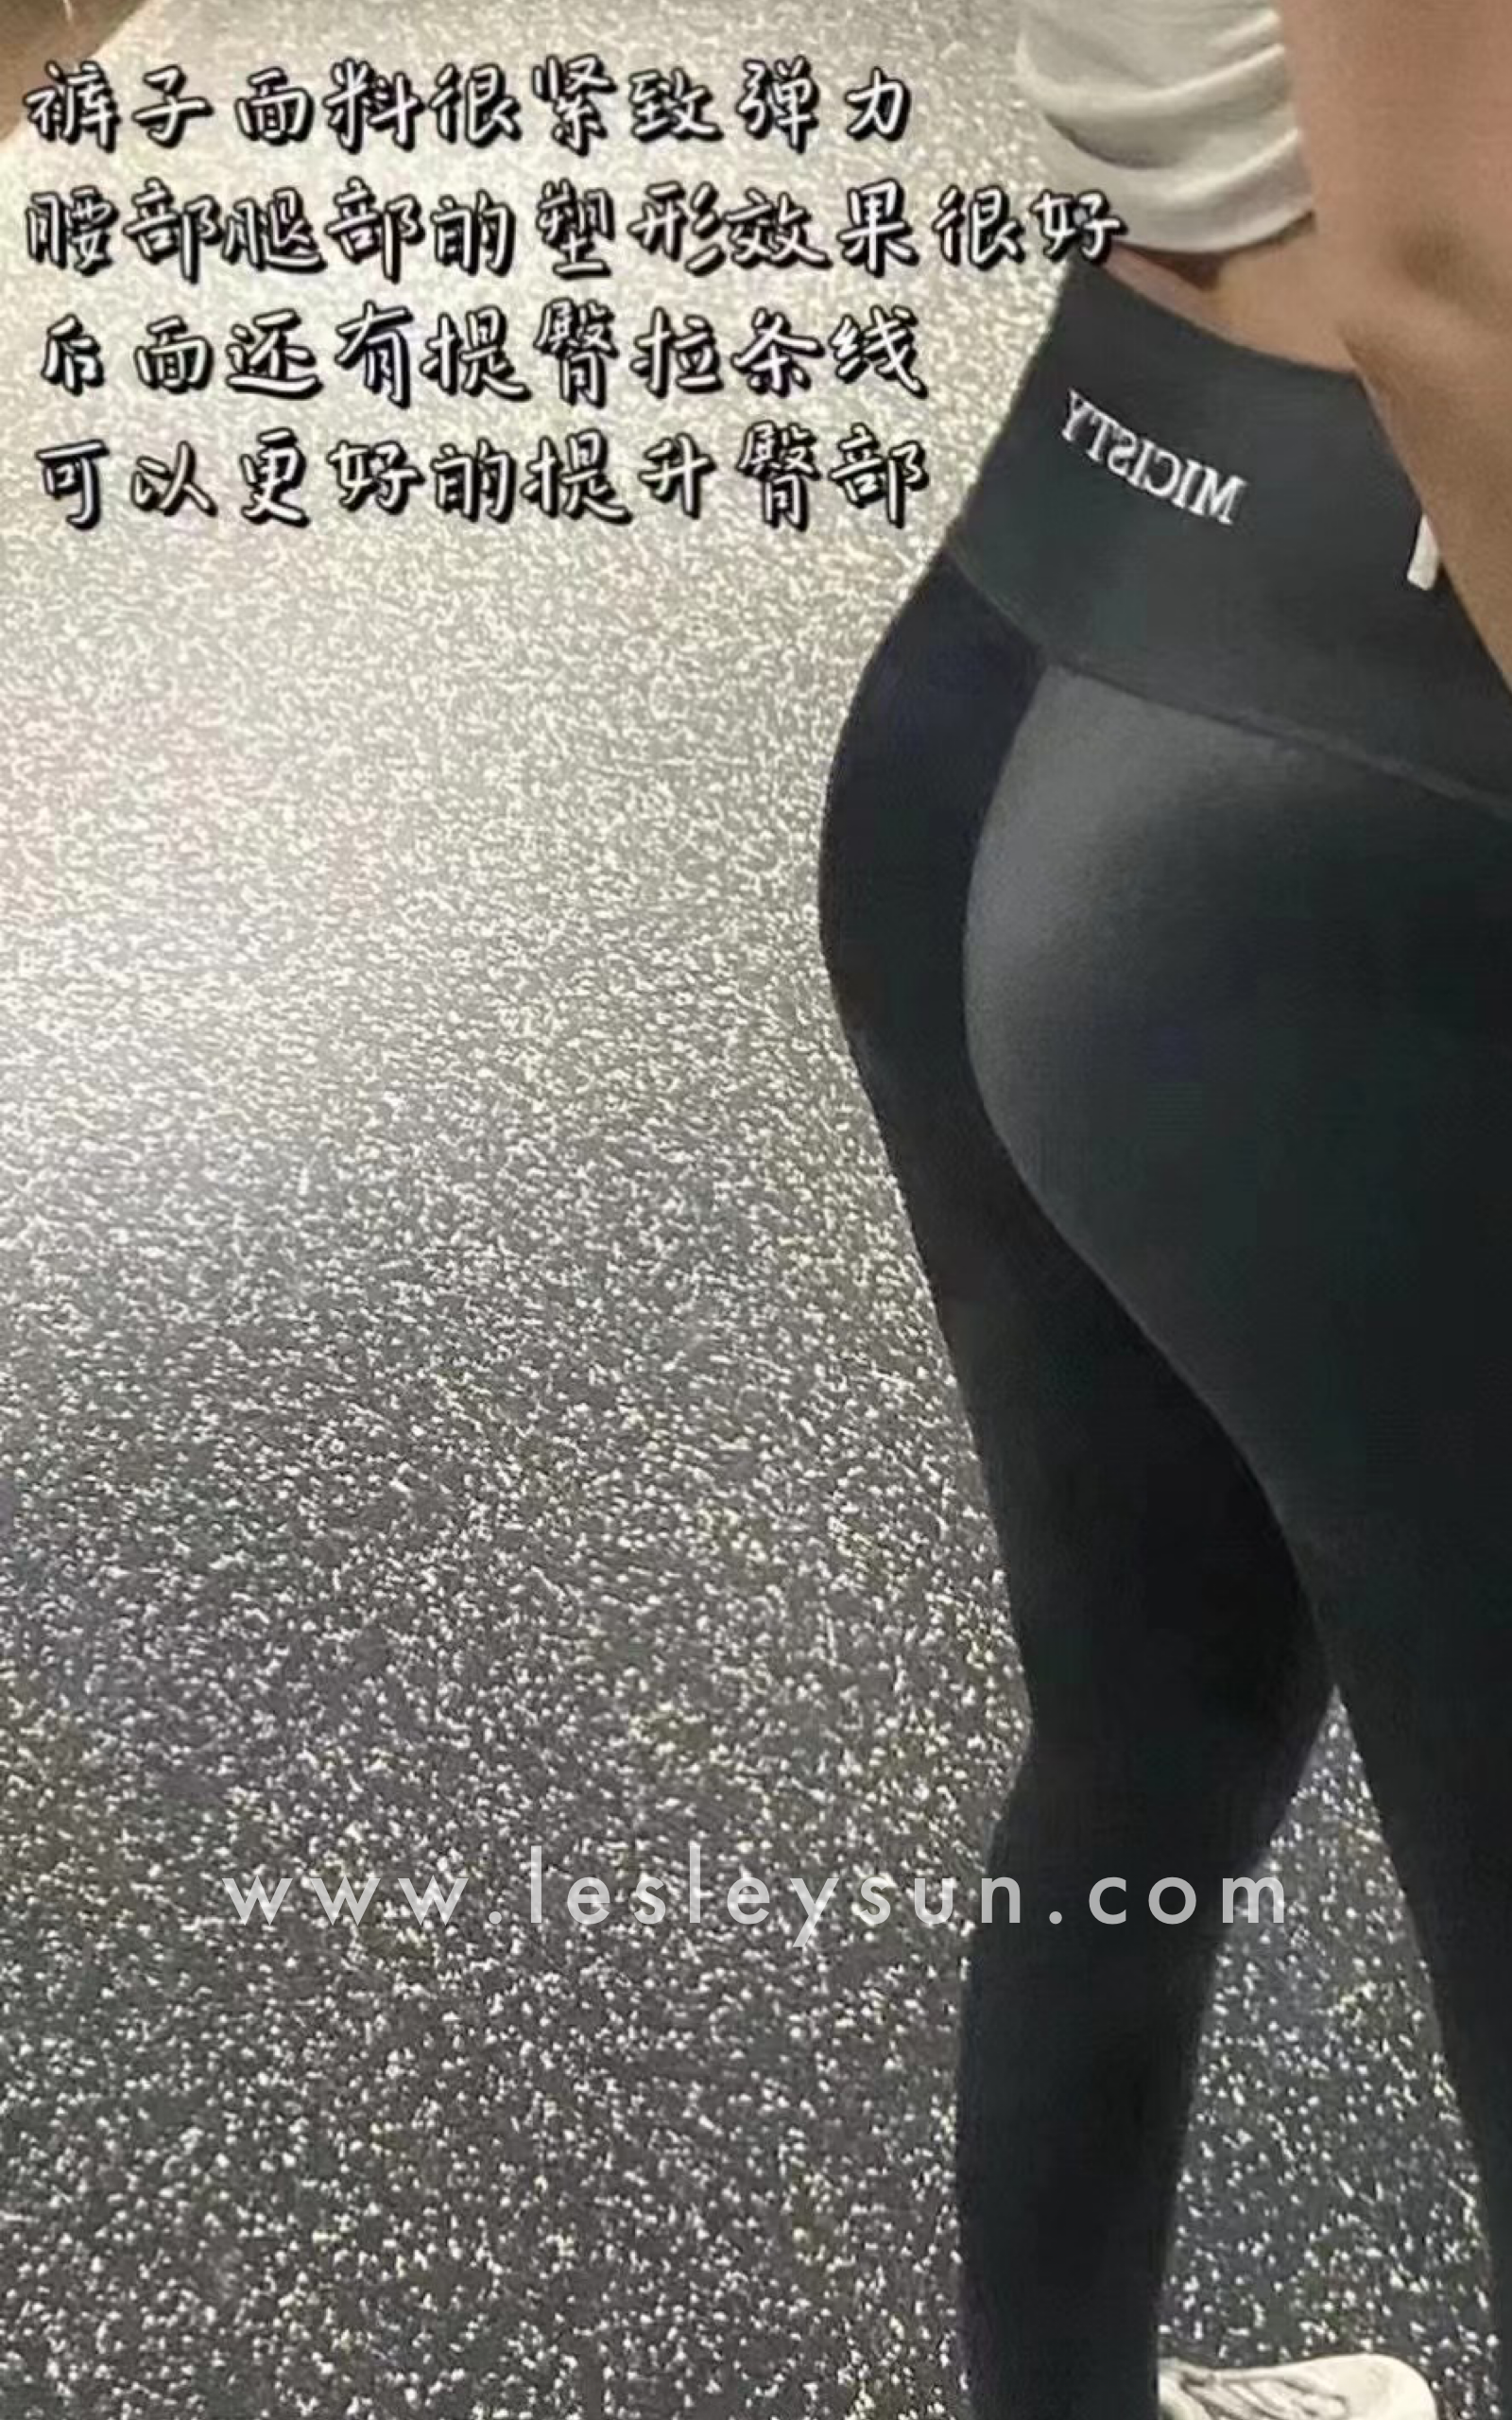 Authentic Micisty Sport Legging [Due to hygiene concerns, no exchange is permissible]